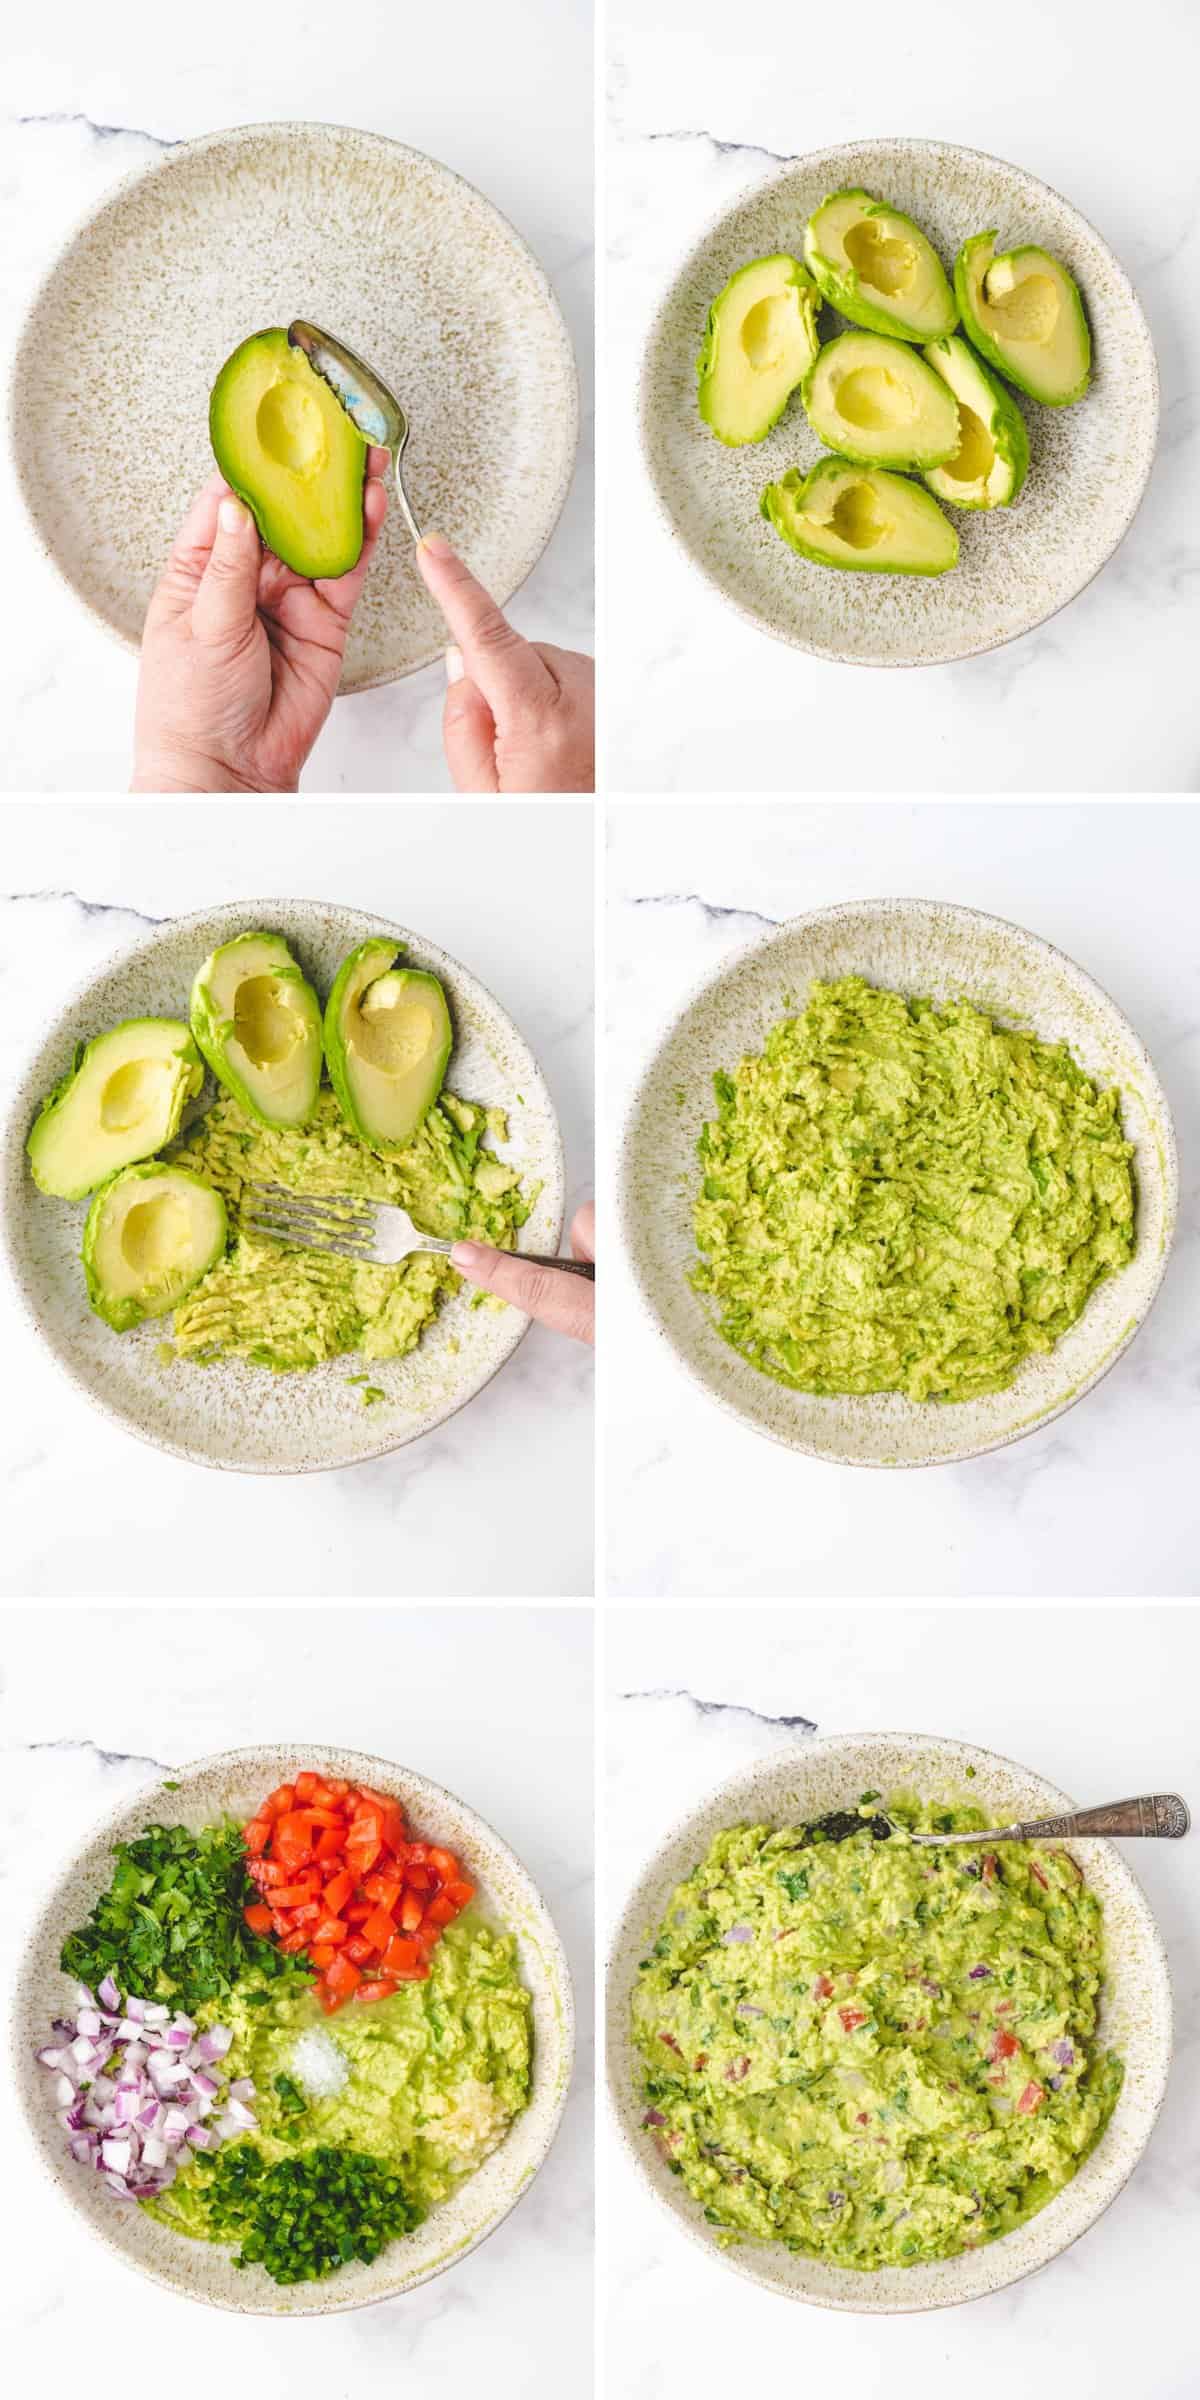 Collage image showing step-by-step how to make easy homemade guacamole.